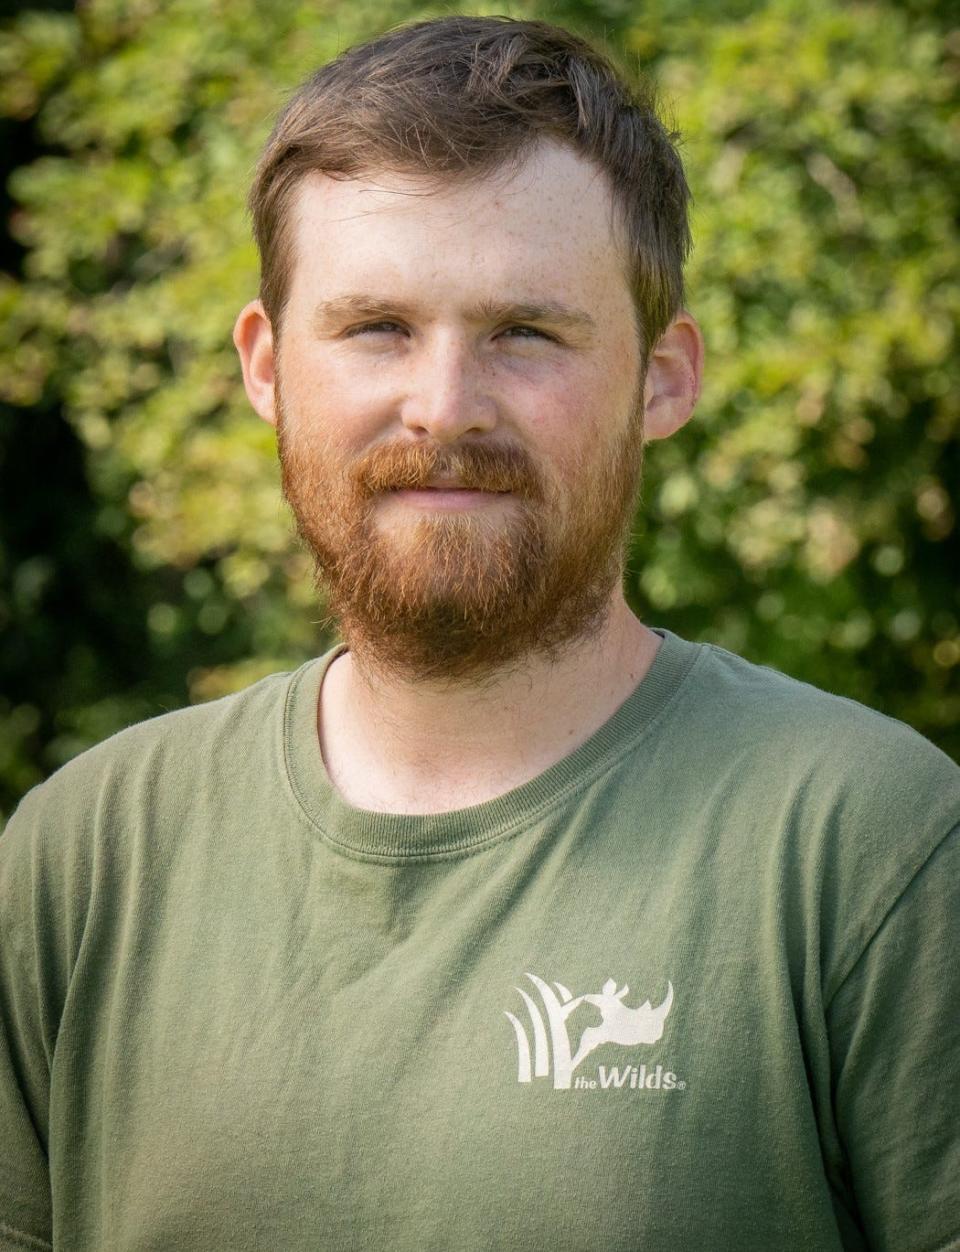 Wyatt Flood is the coordinator of on-site programs at The Wilds.